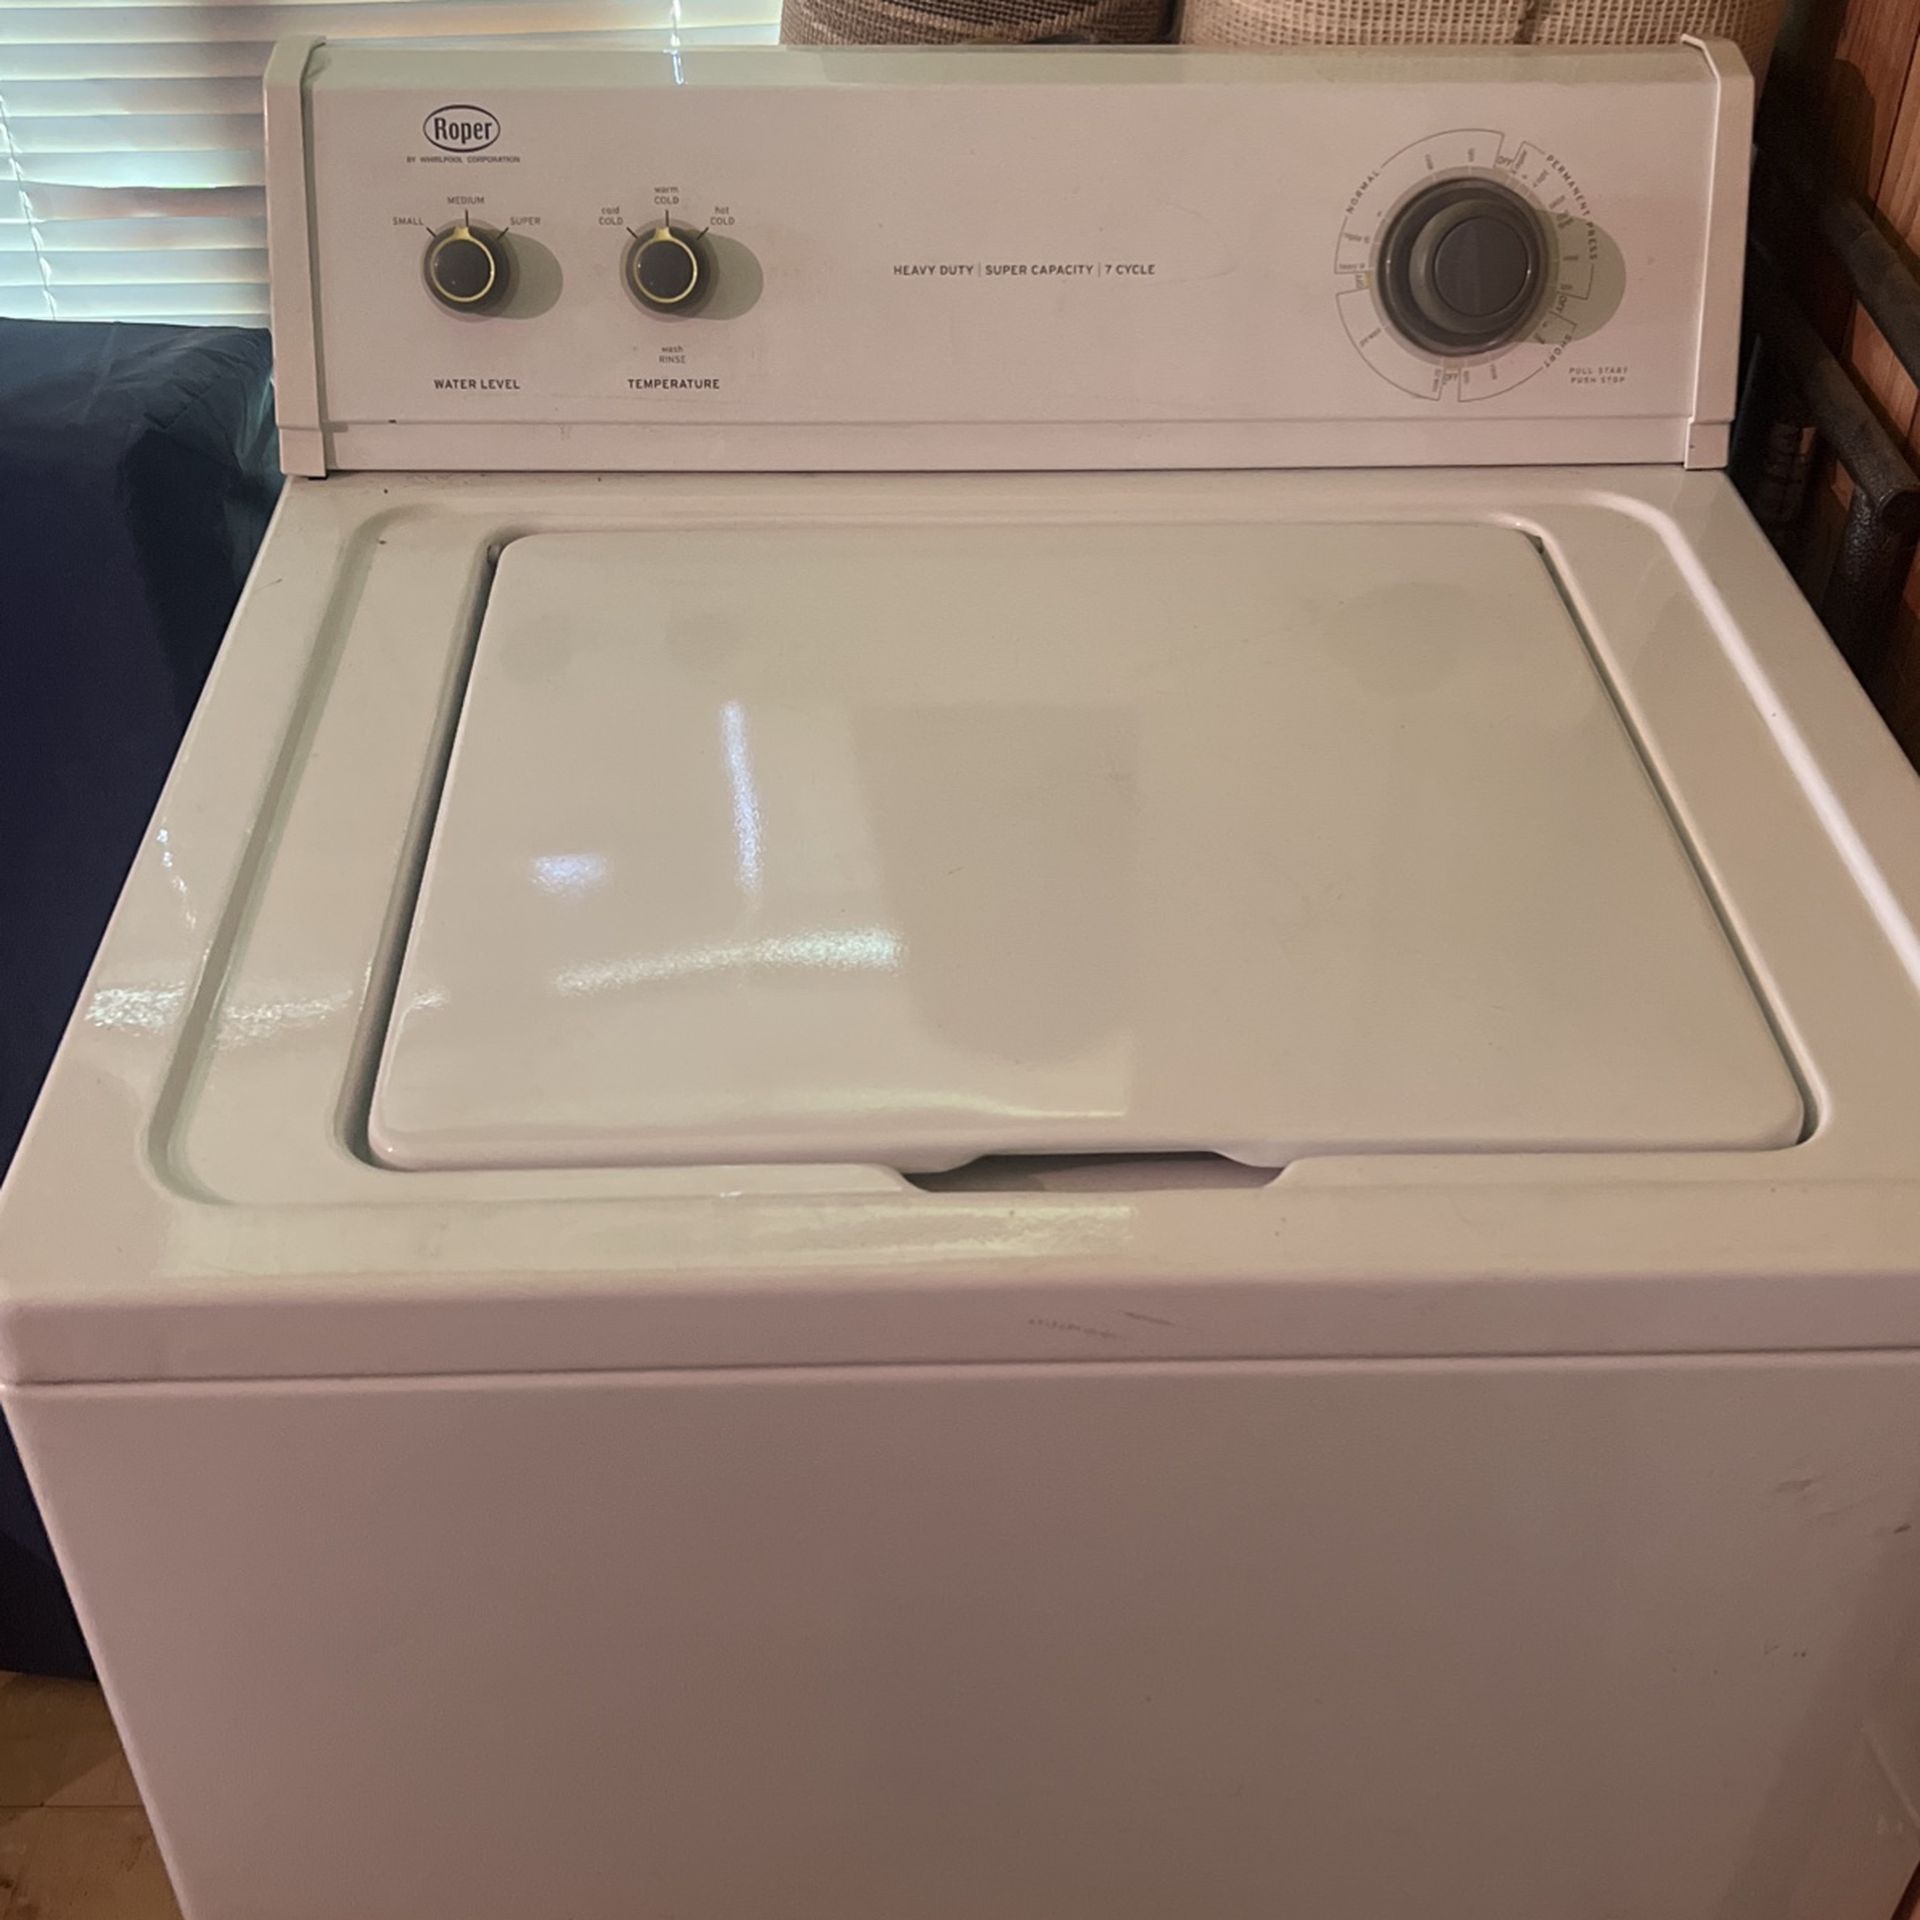 Washer And Dryer Whirlpool By Rober Excellent Condition